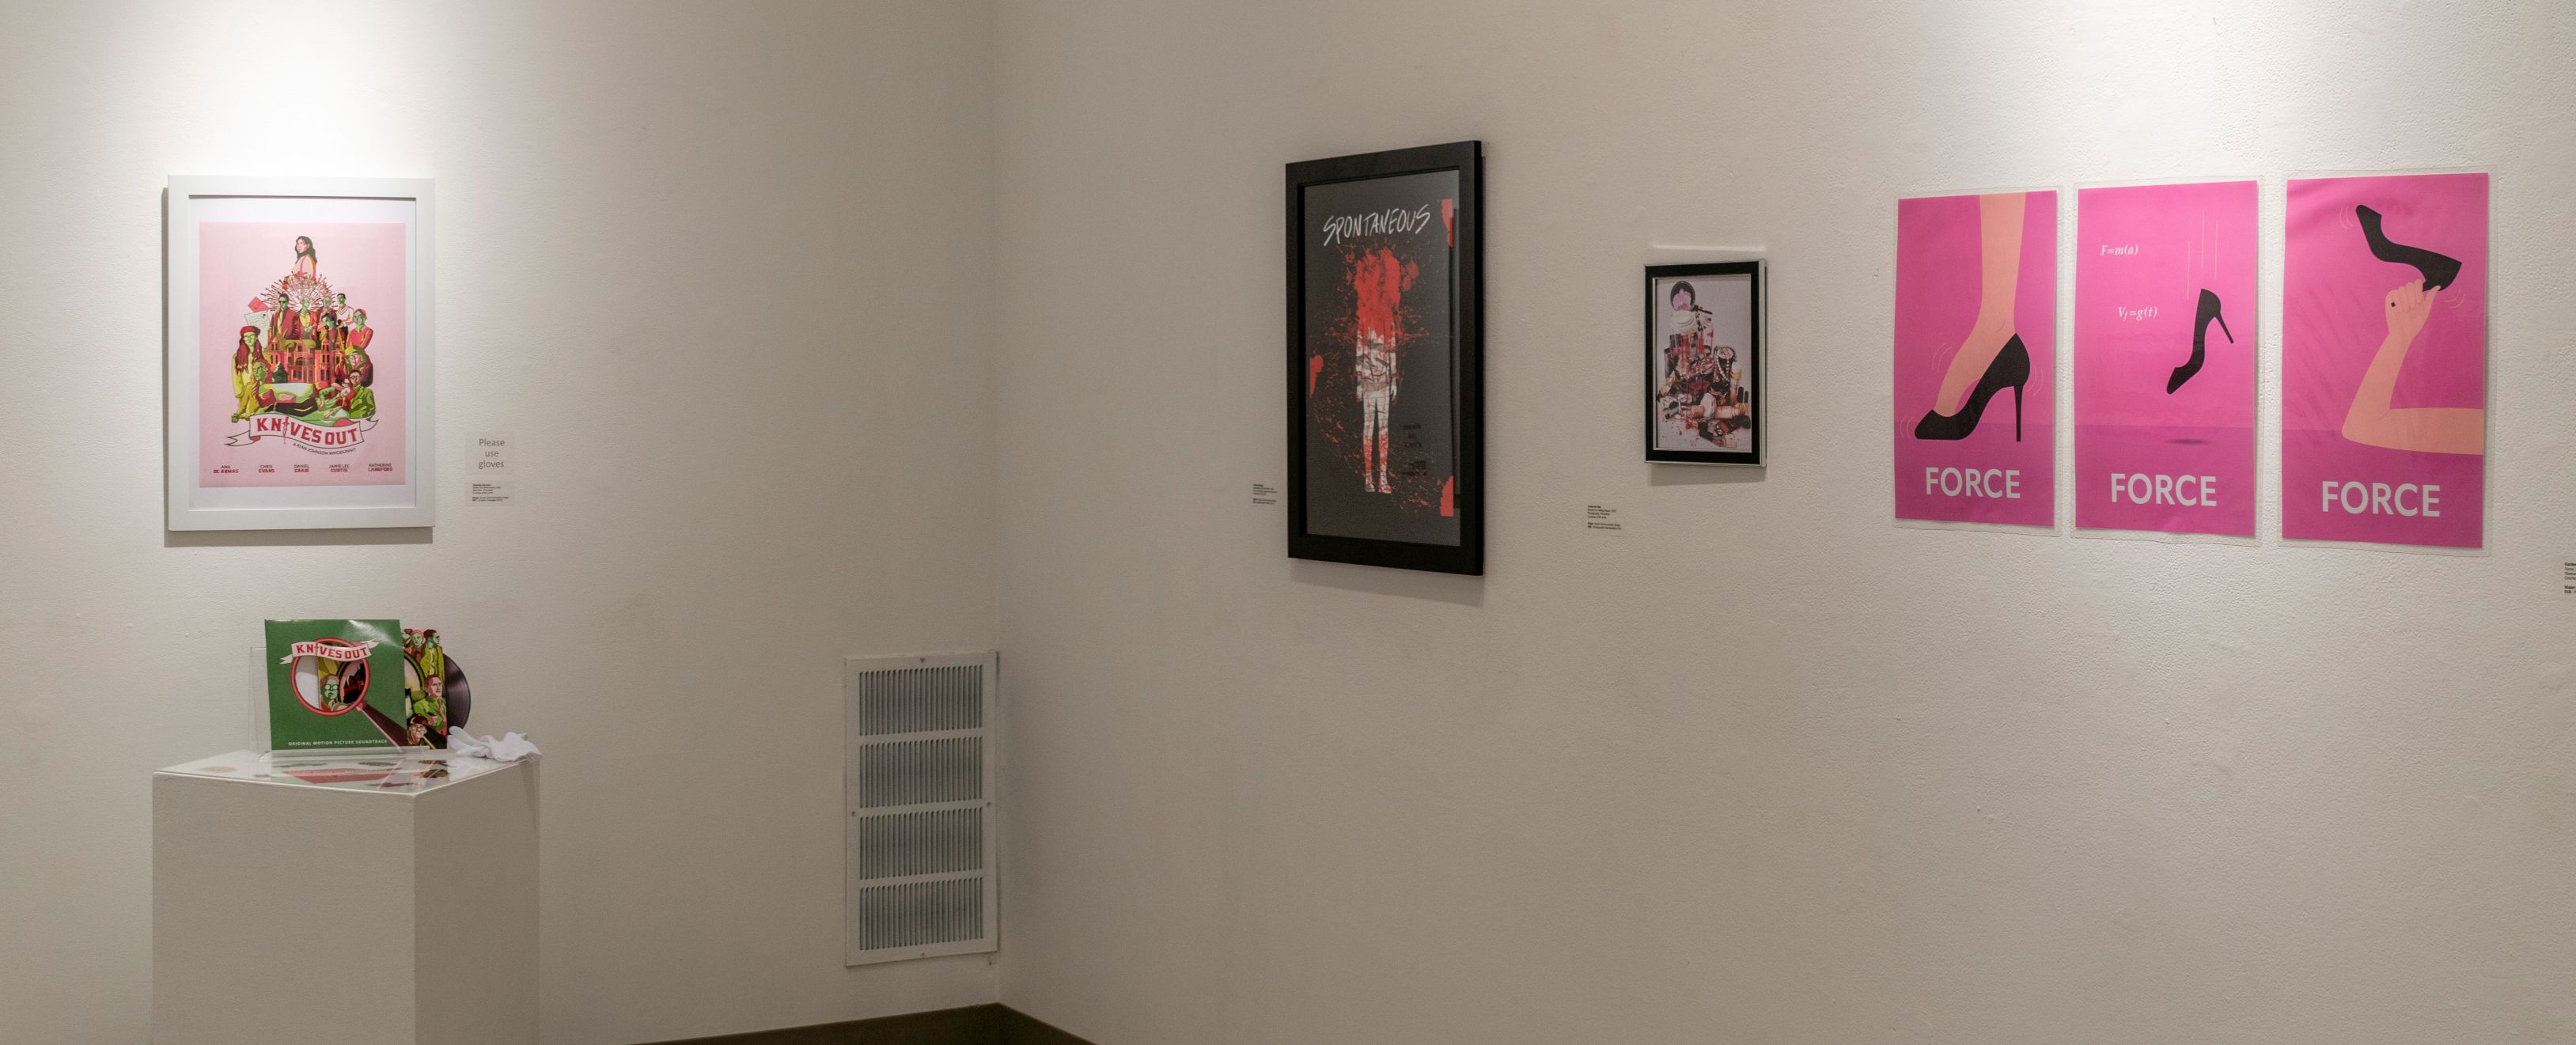 Installation View, Front West Gallery, Poly Kroma 2022 Exhibition, April 28, 2022 to May 22, 2022